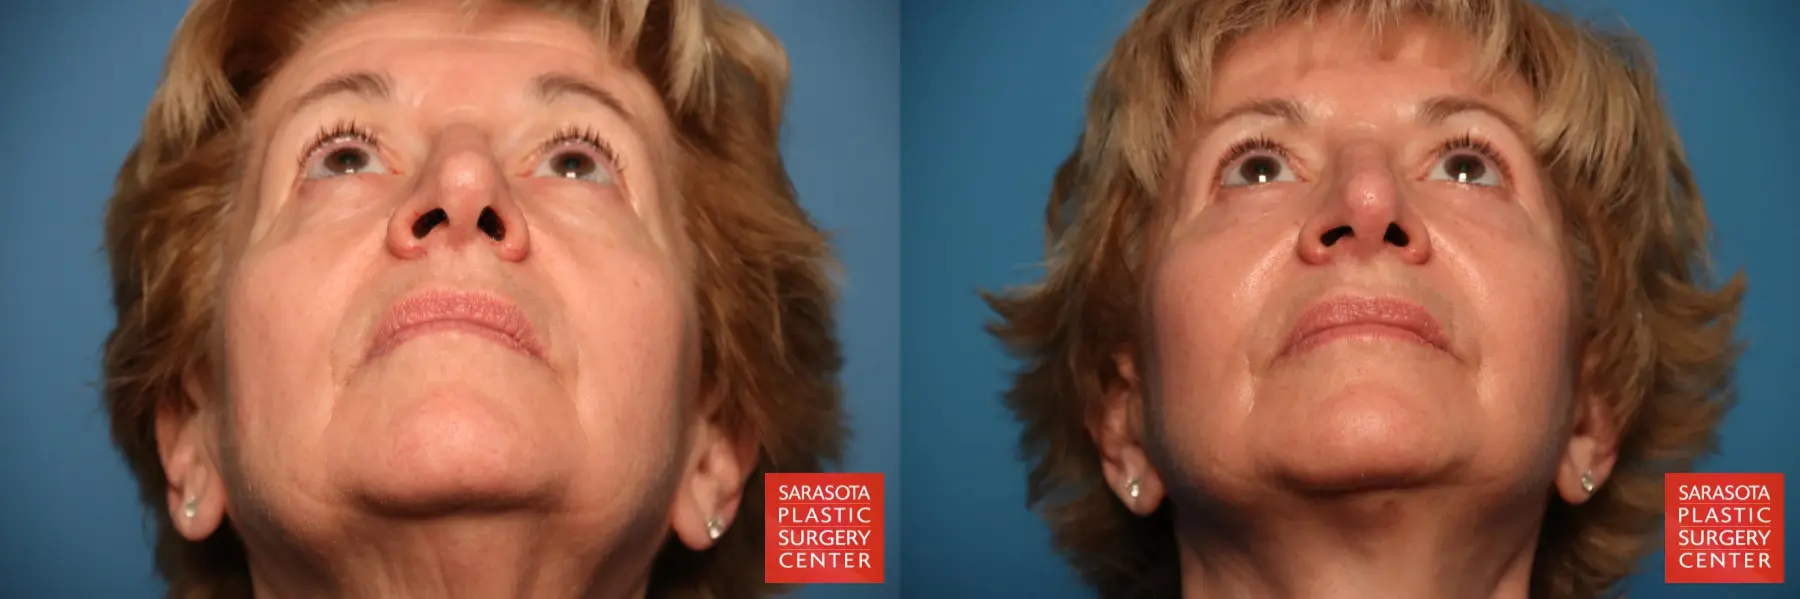 Rhinoplasty: Patient 4 - Before and After 4